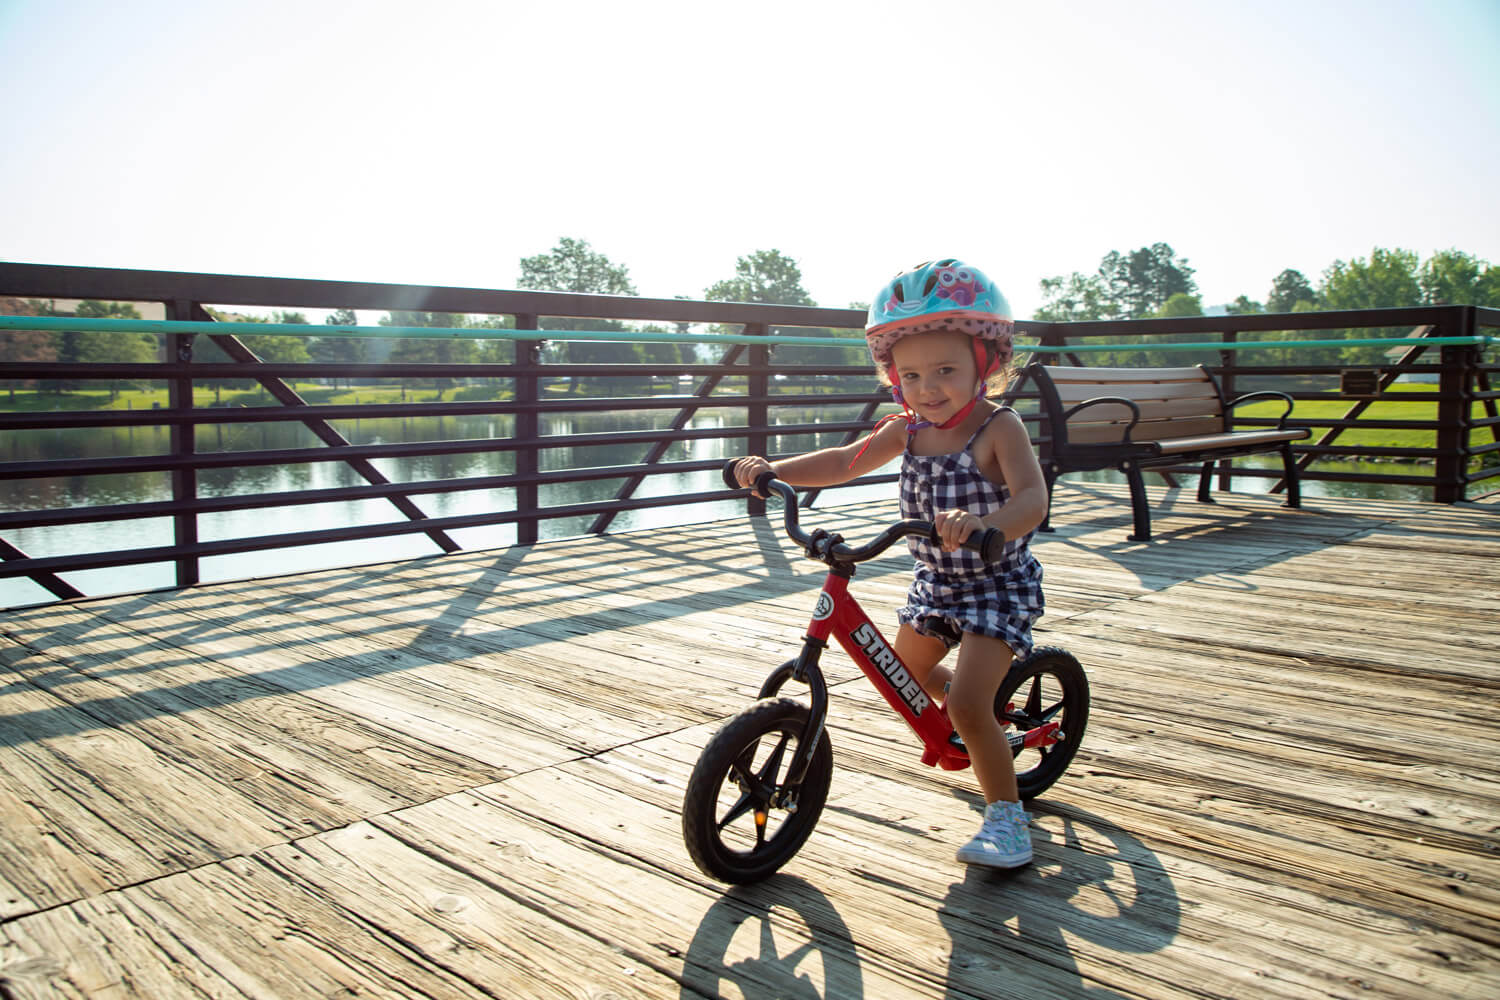 A girl on a red balance bike with Strider High Rise Wide Handlebars rides a wooden path next to a lake